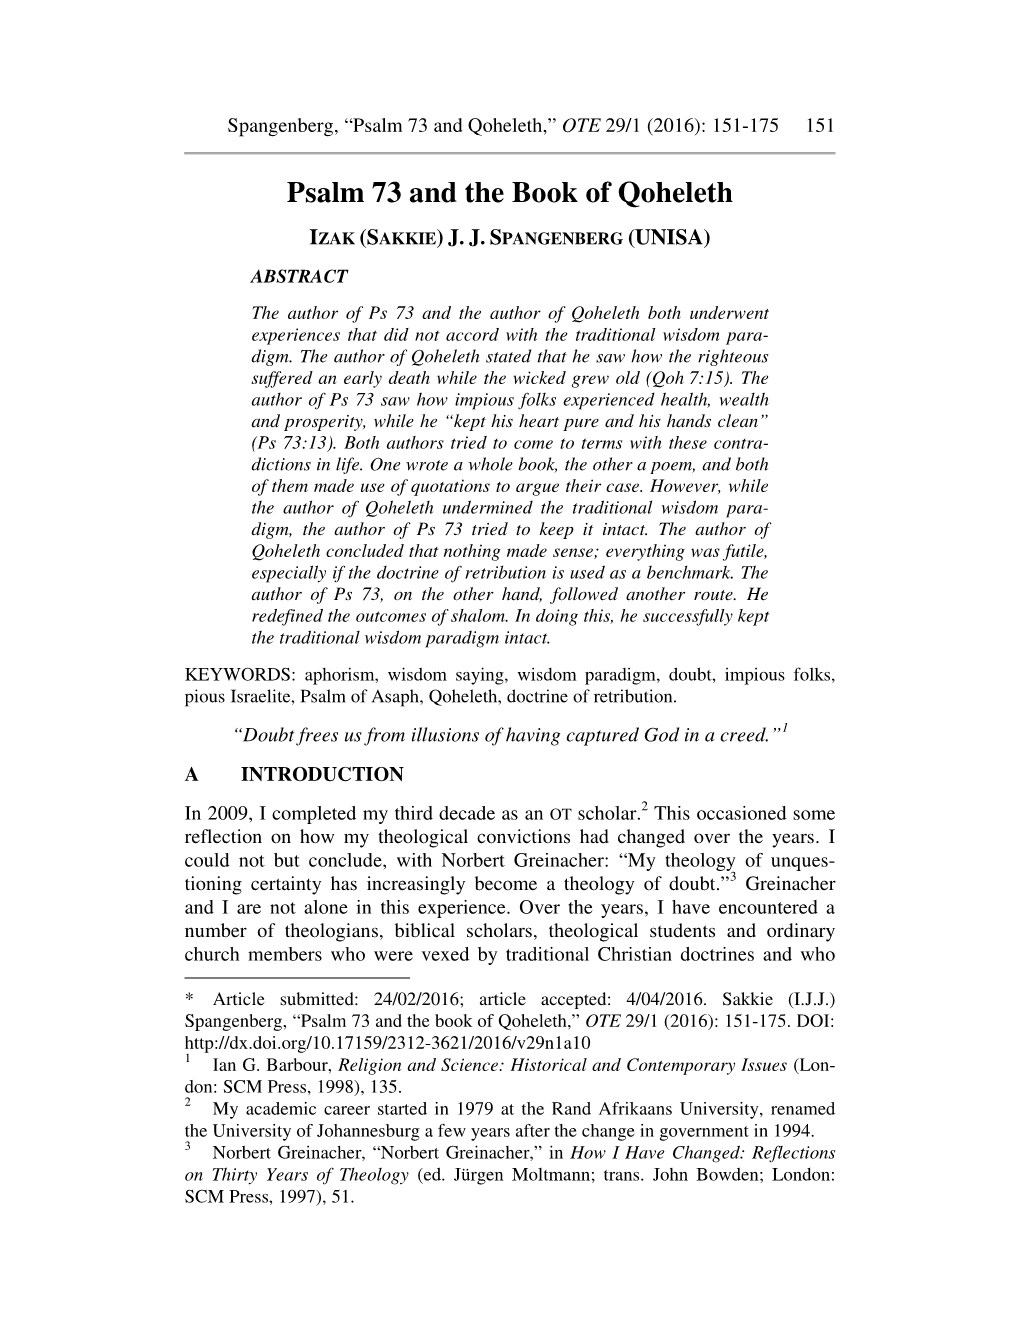 Psalm 73 and the Book of Qoheleth